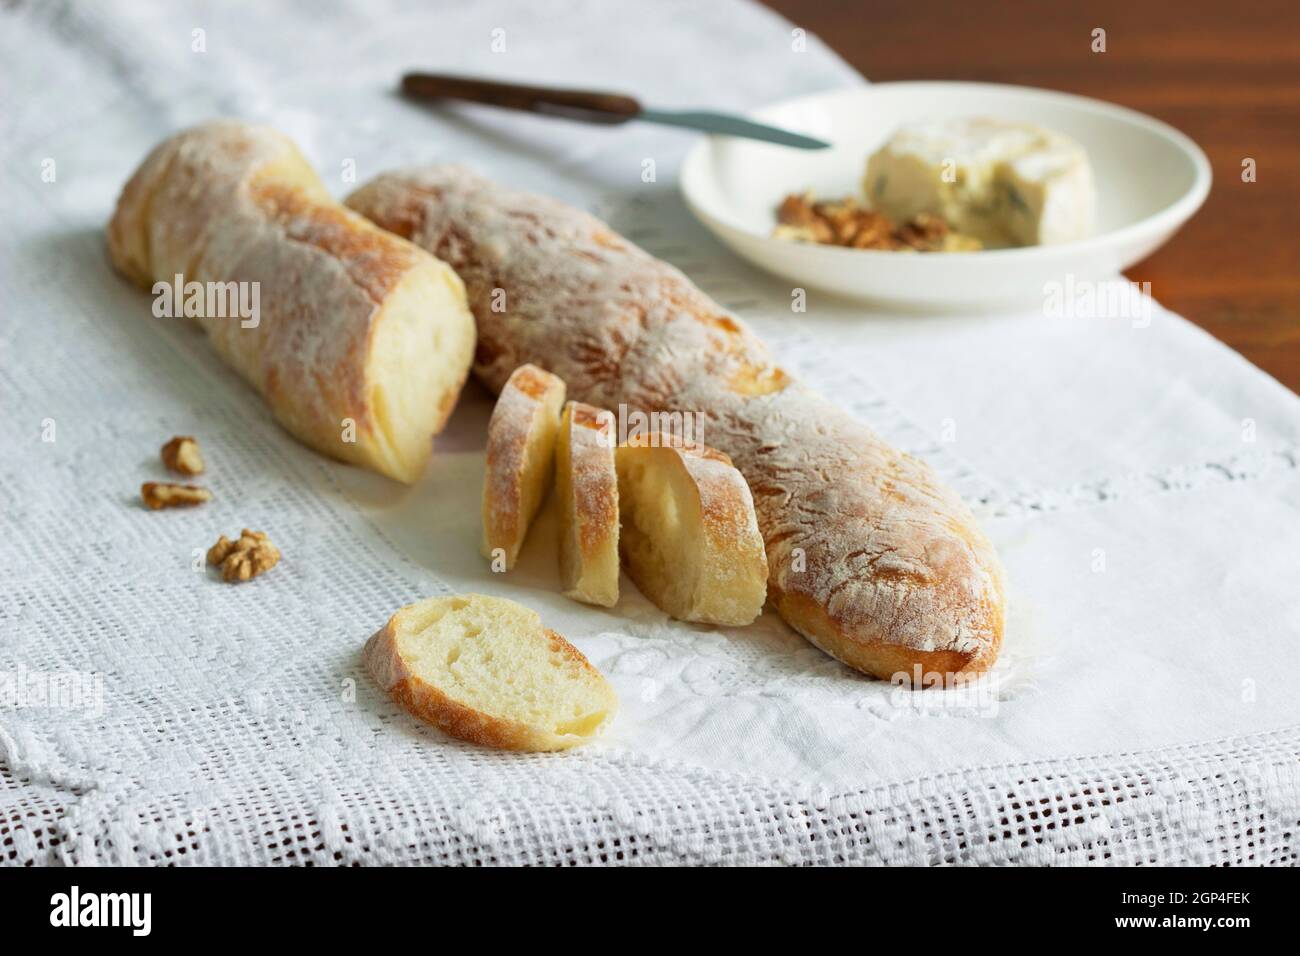 Homemade baguettes, served with blue cheese and nuts. Rustic style. Stock Photo